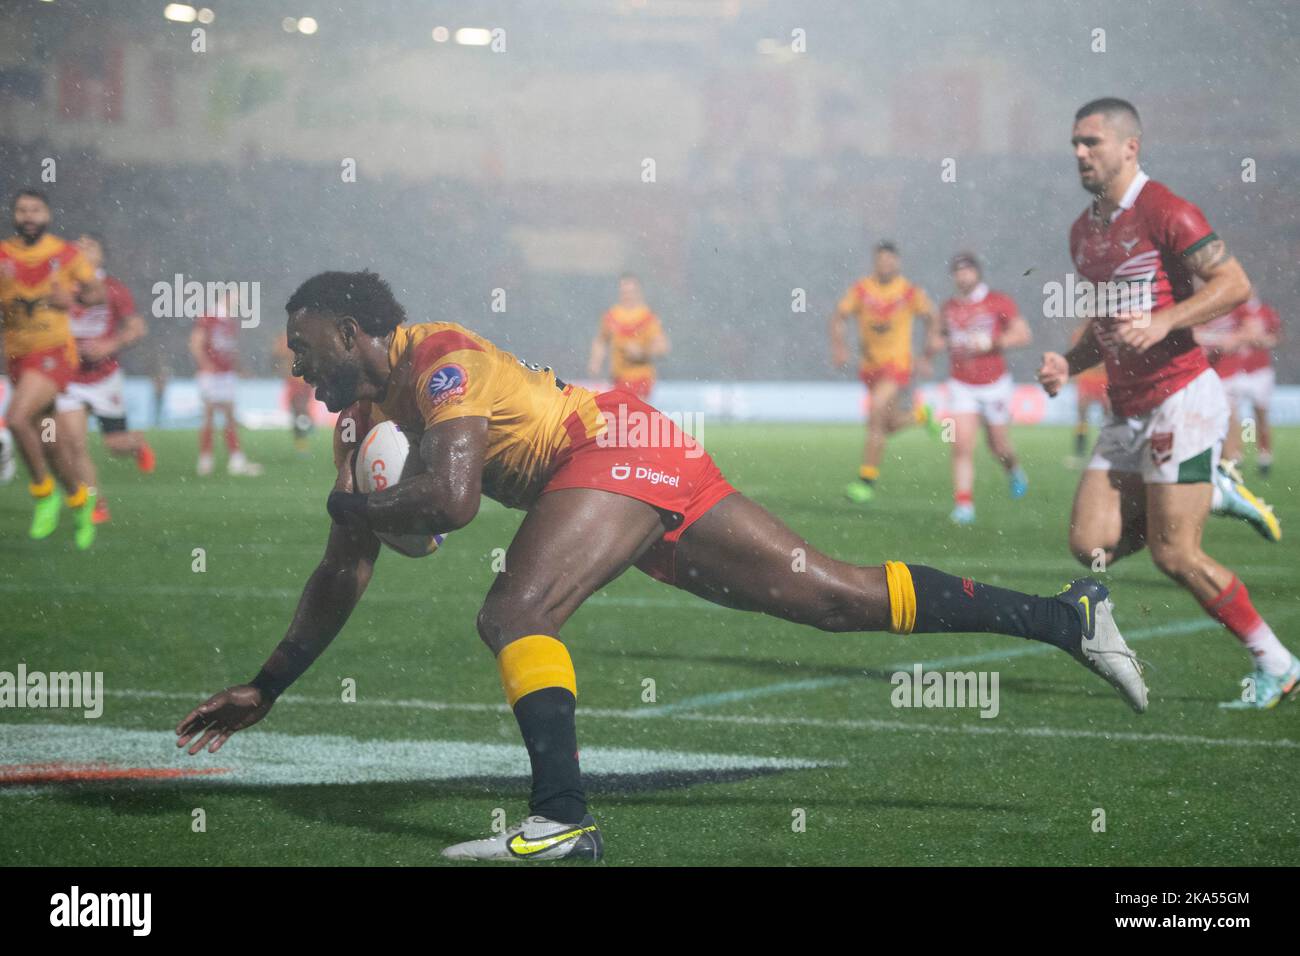 Papua New Guinea Winger Jimmy Ngutlik runs on to score a try during the 2021 Rugby League World Cup Pool D match between Papua New Guinea and Wales at the Eco-Power Stadium,